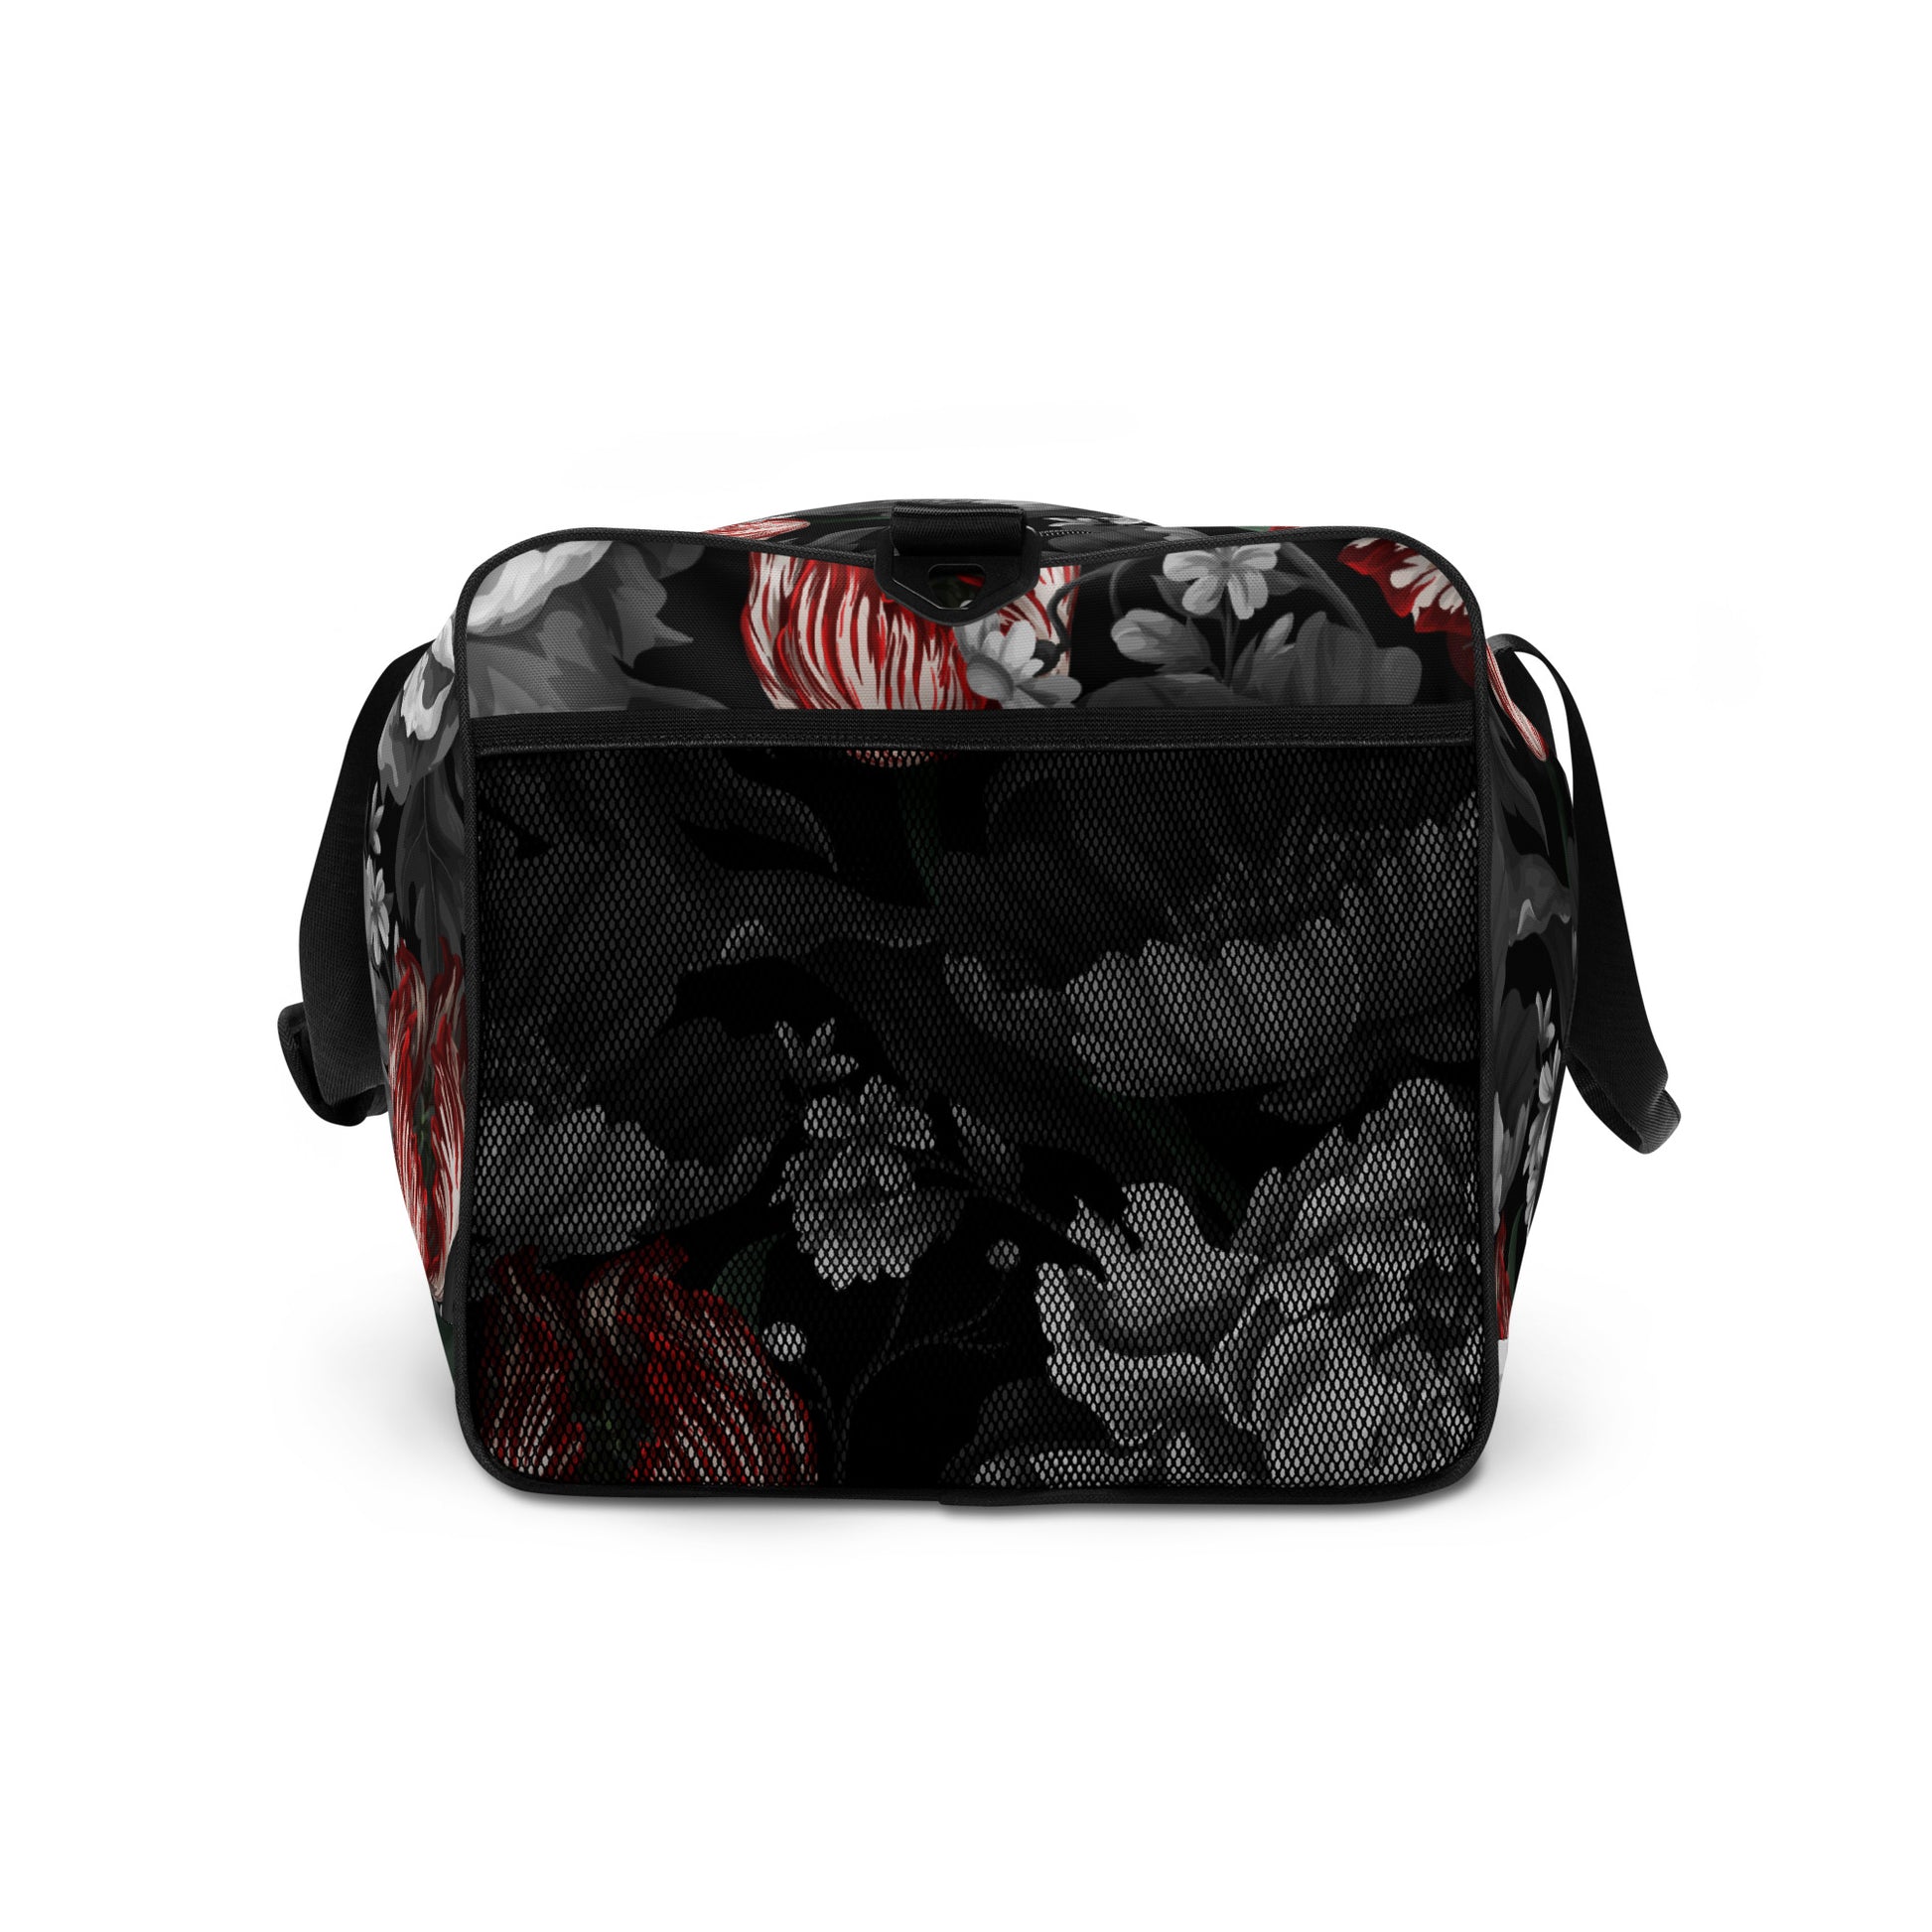 Gothic Black and Red Peony Duffle bag CedarHill Country Market